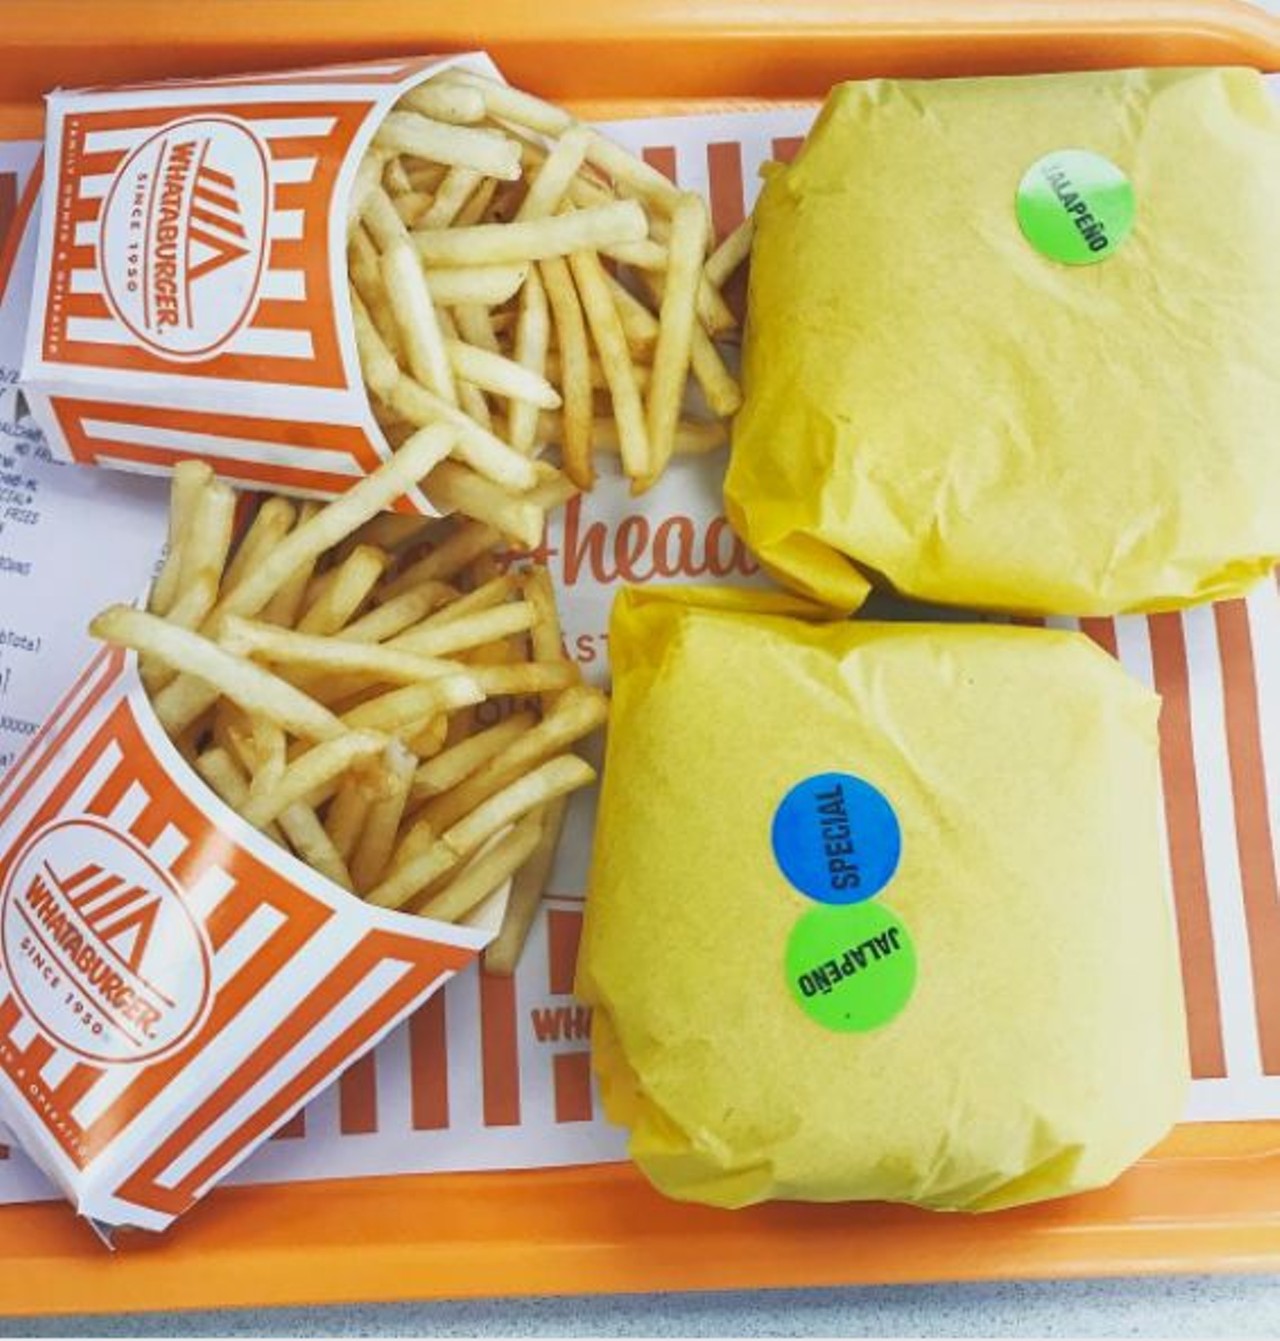 Your go-to at Whataburger
multiple locations
Burgers, fries, honey butter chicken biscuits are all must-have cures for the munchies. 
Photo via Instagram, 
lizmoody